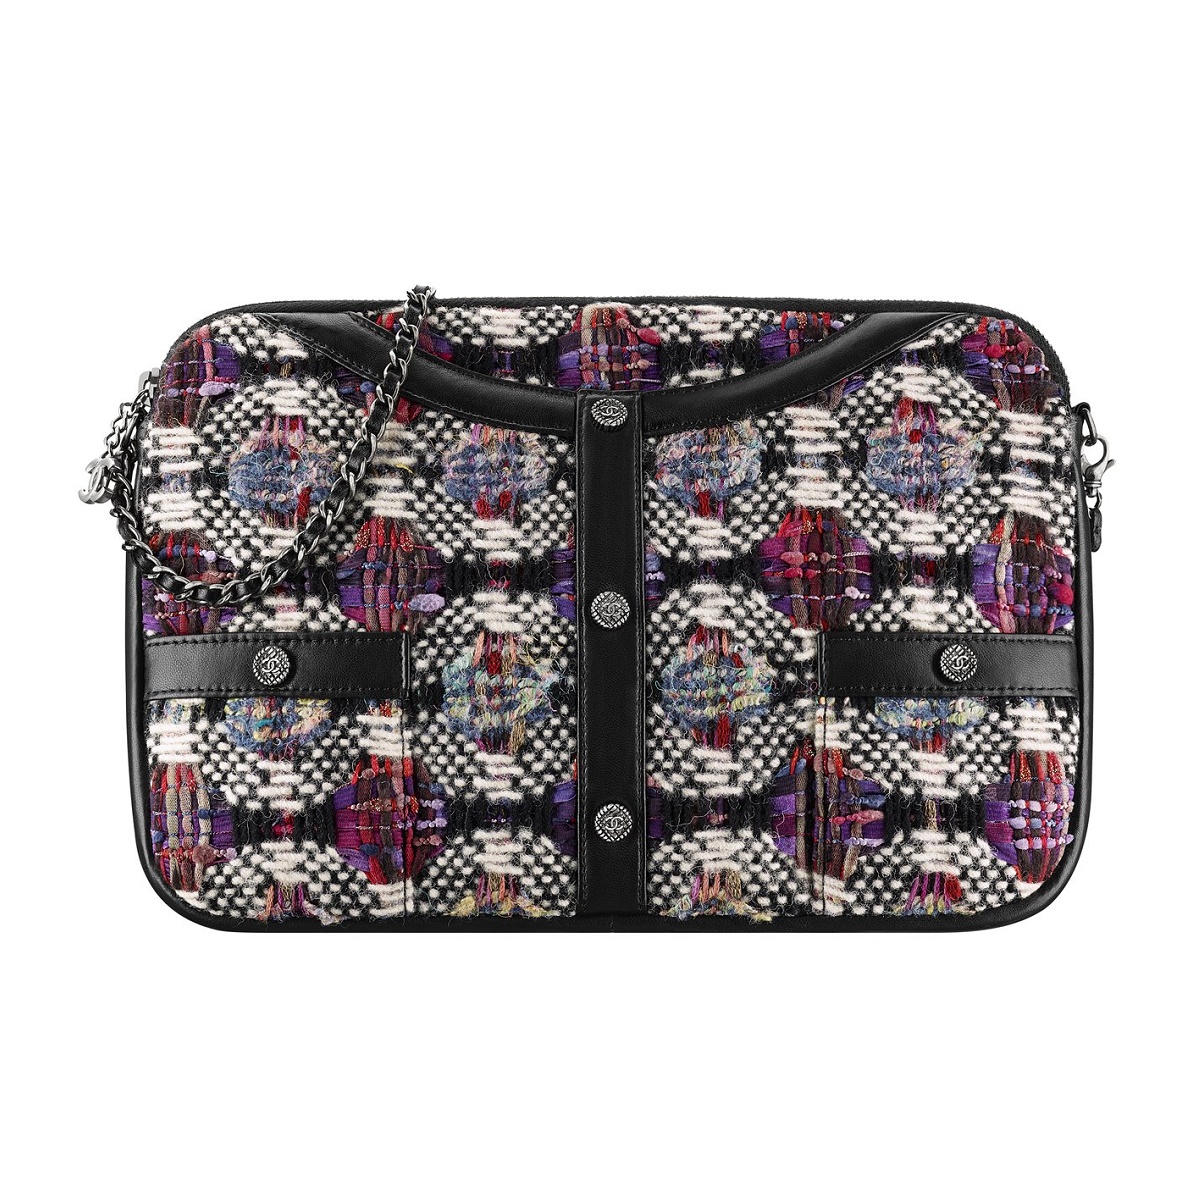 05_a91386-y61099-c9554-black-leather-and-multicoloured-tweed-clutch-bag_ld